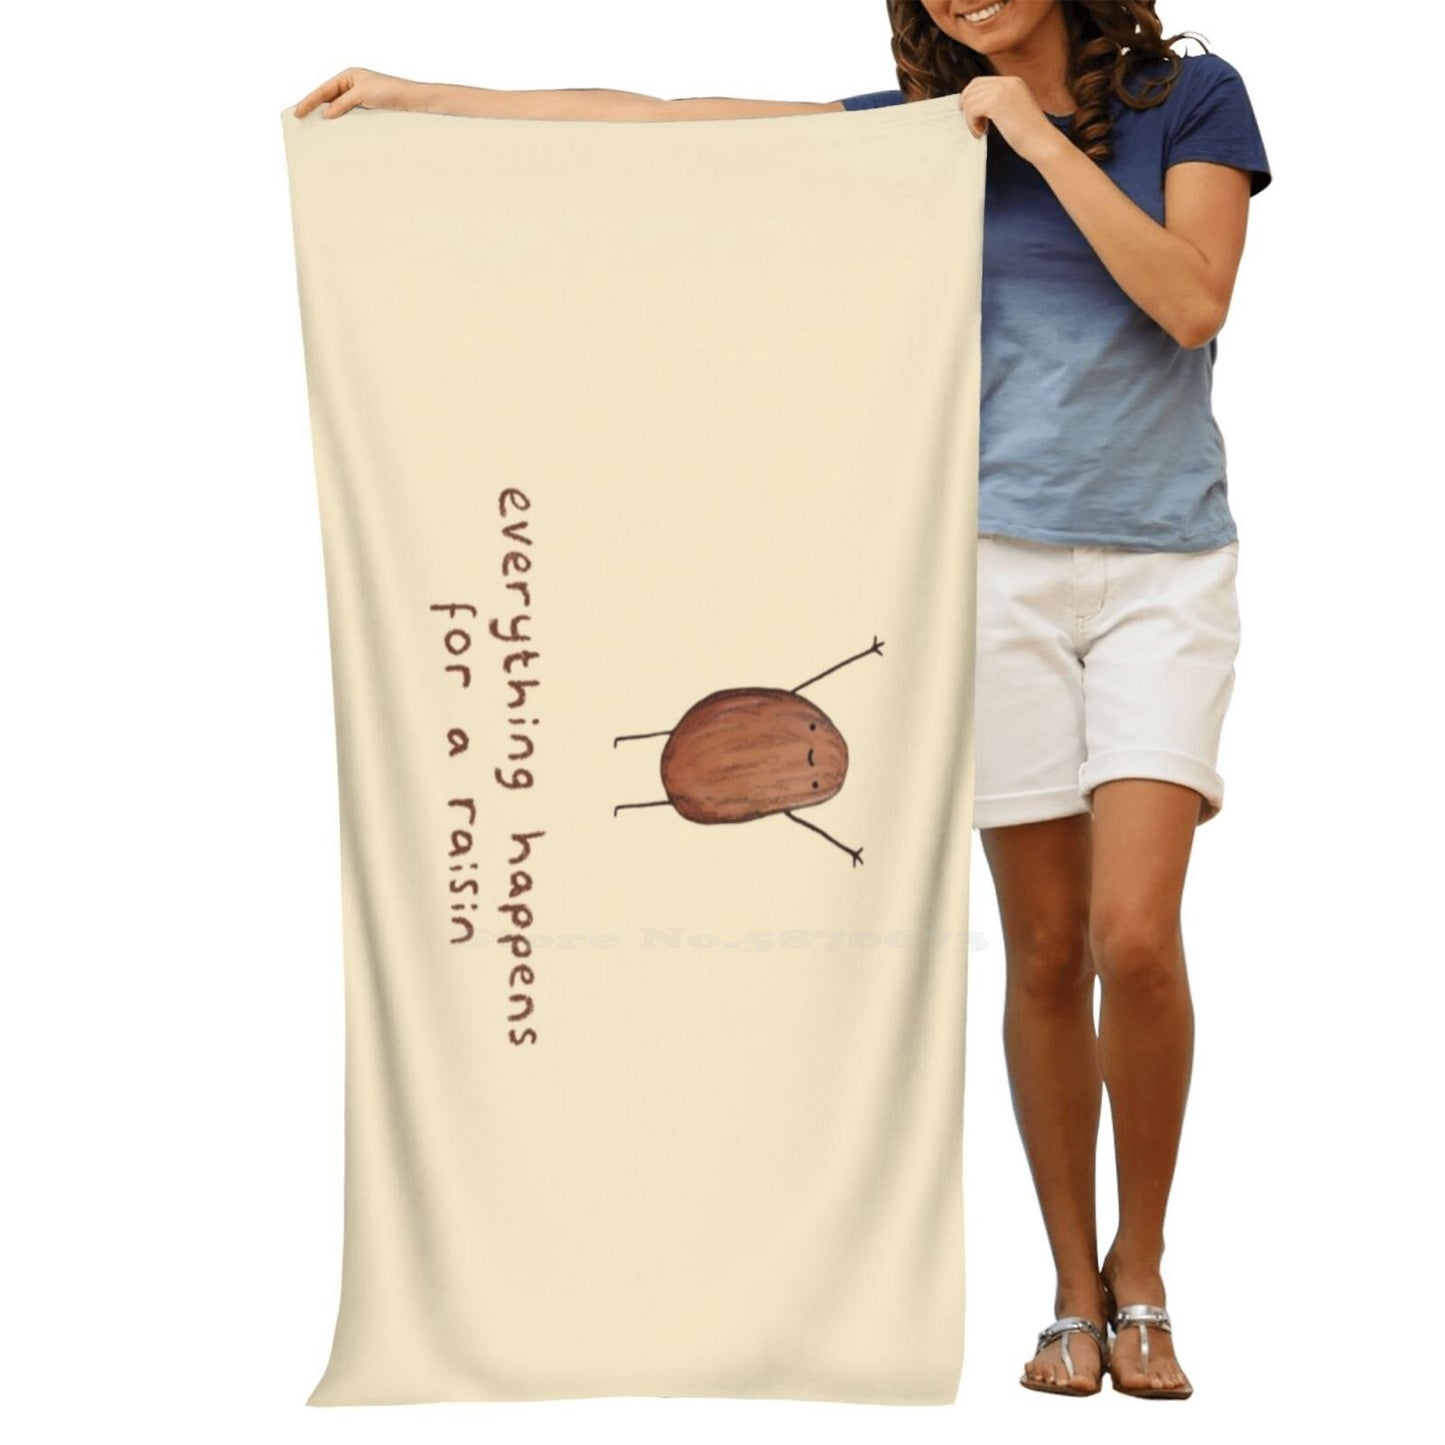 Everything Happens For A Raisin Towel